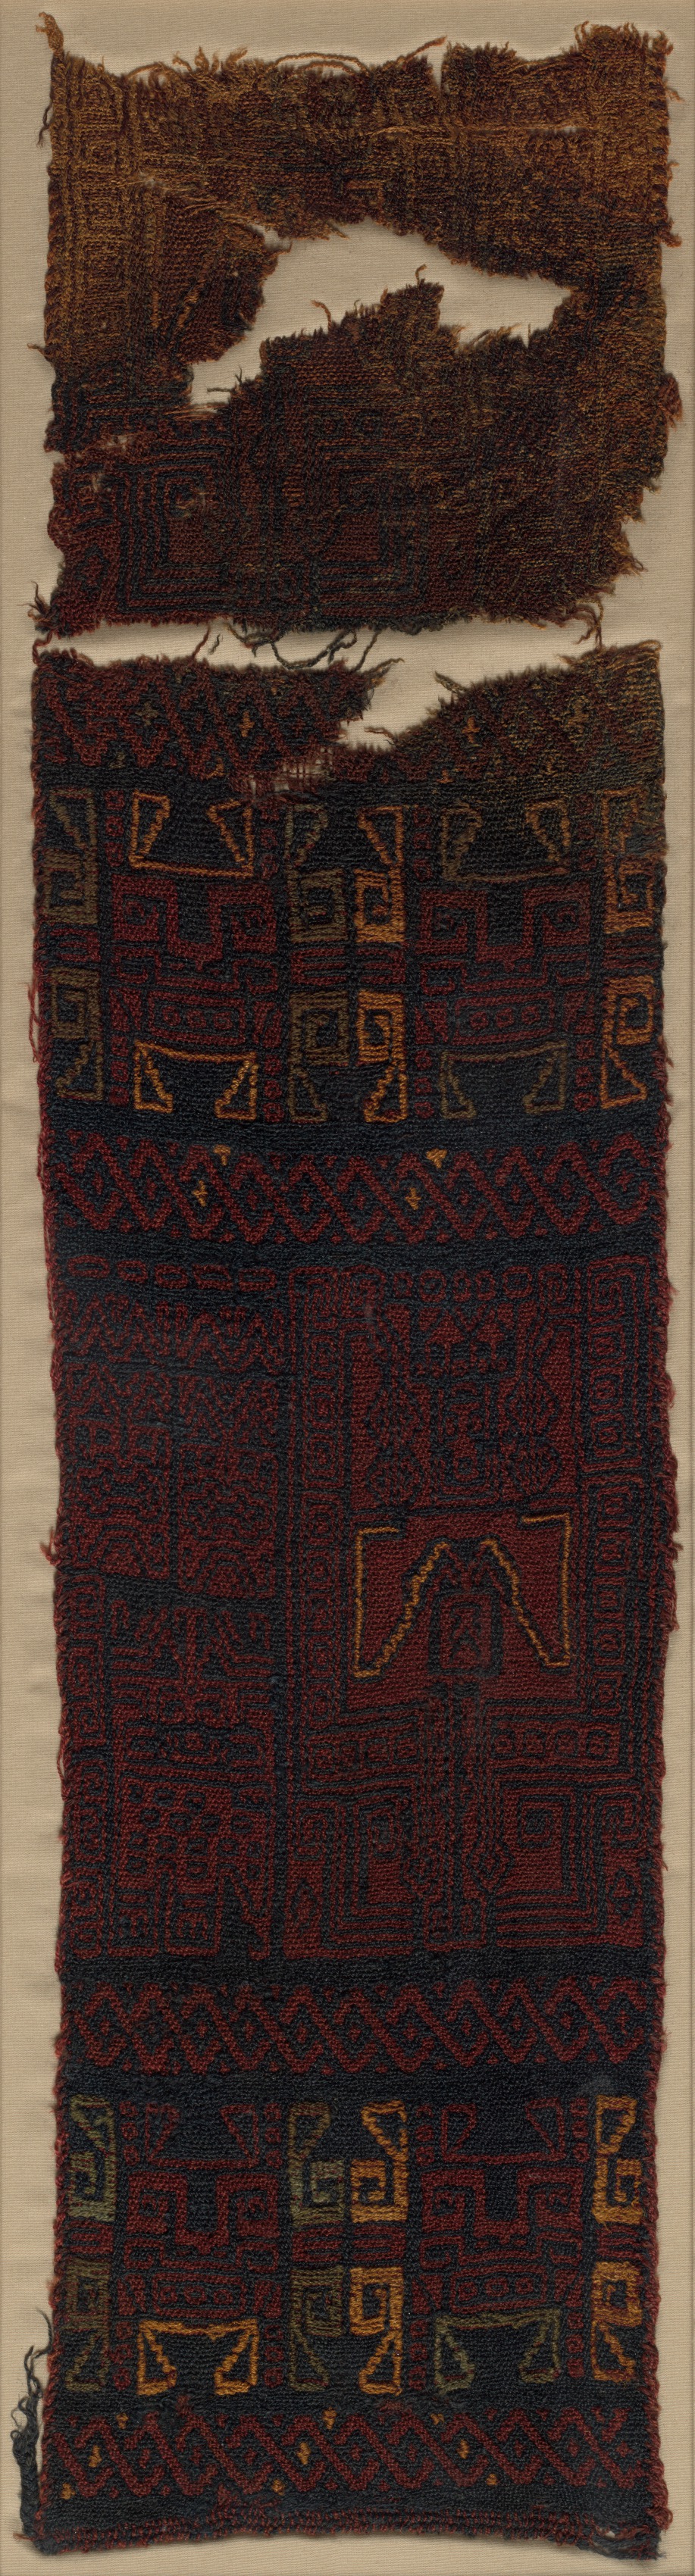 Textile Fragment with Frontal Deity Heads, Felines, and Interlace Pattern